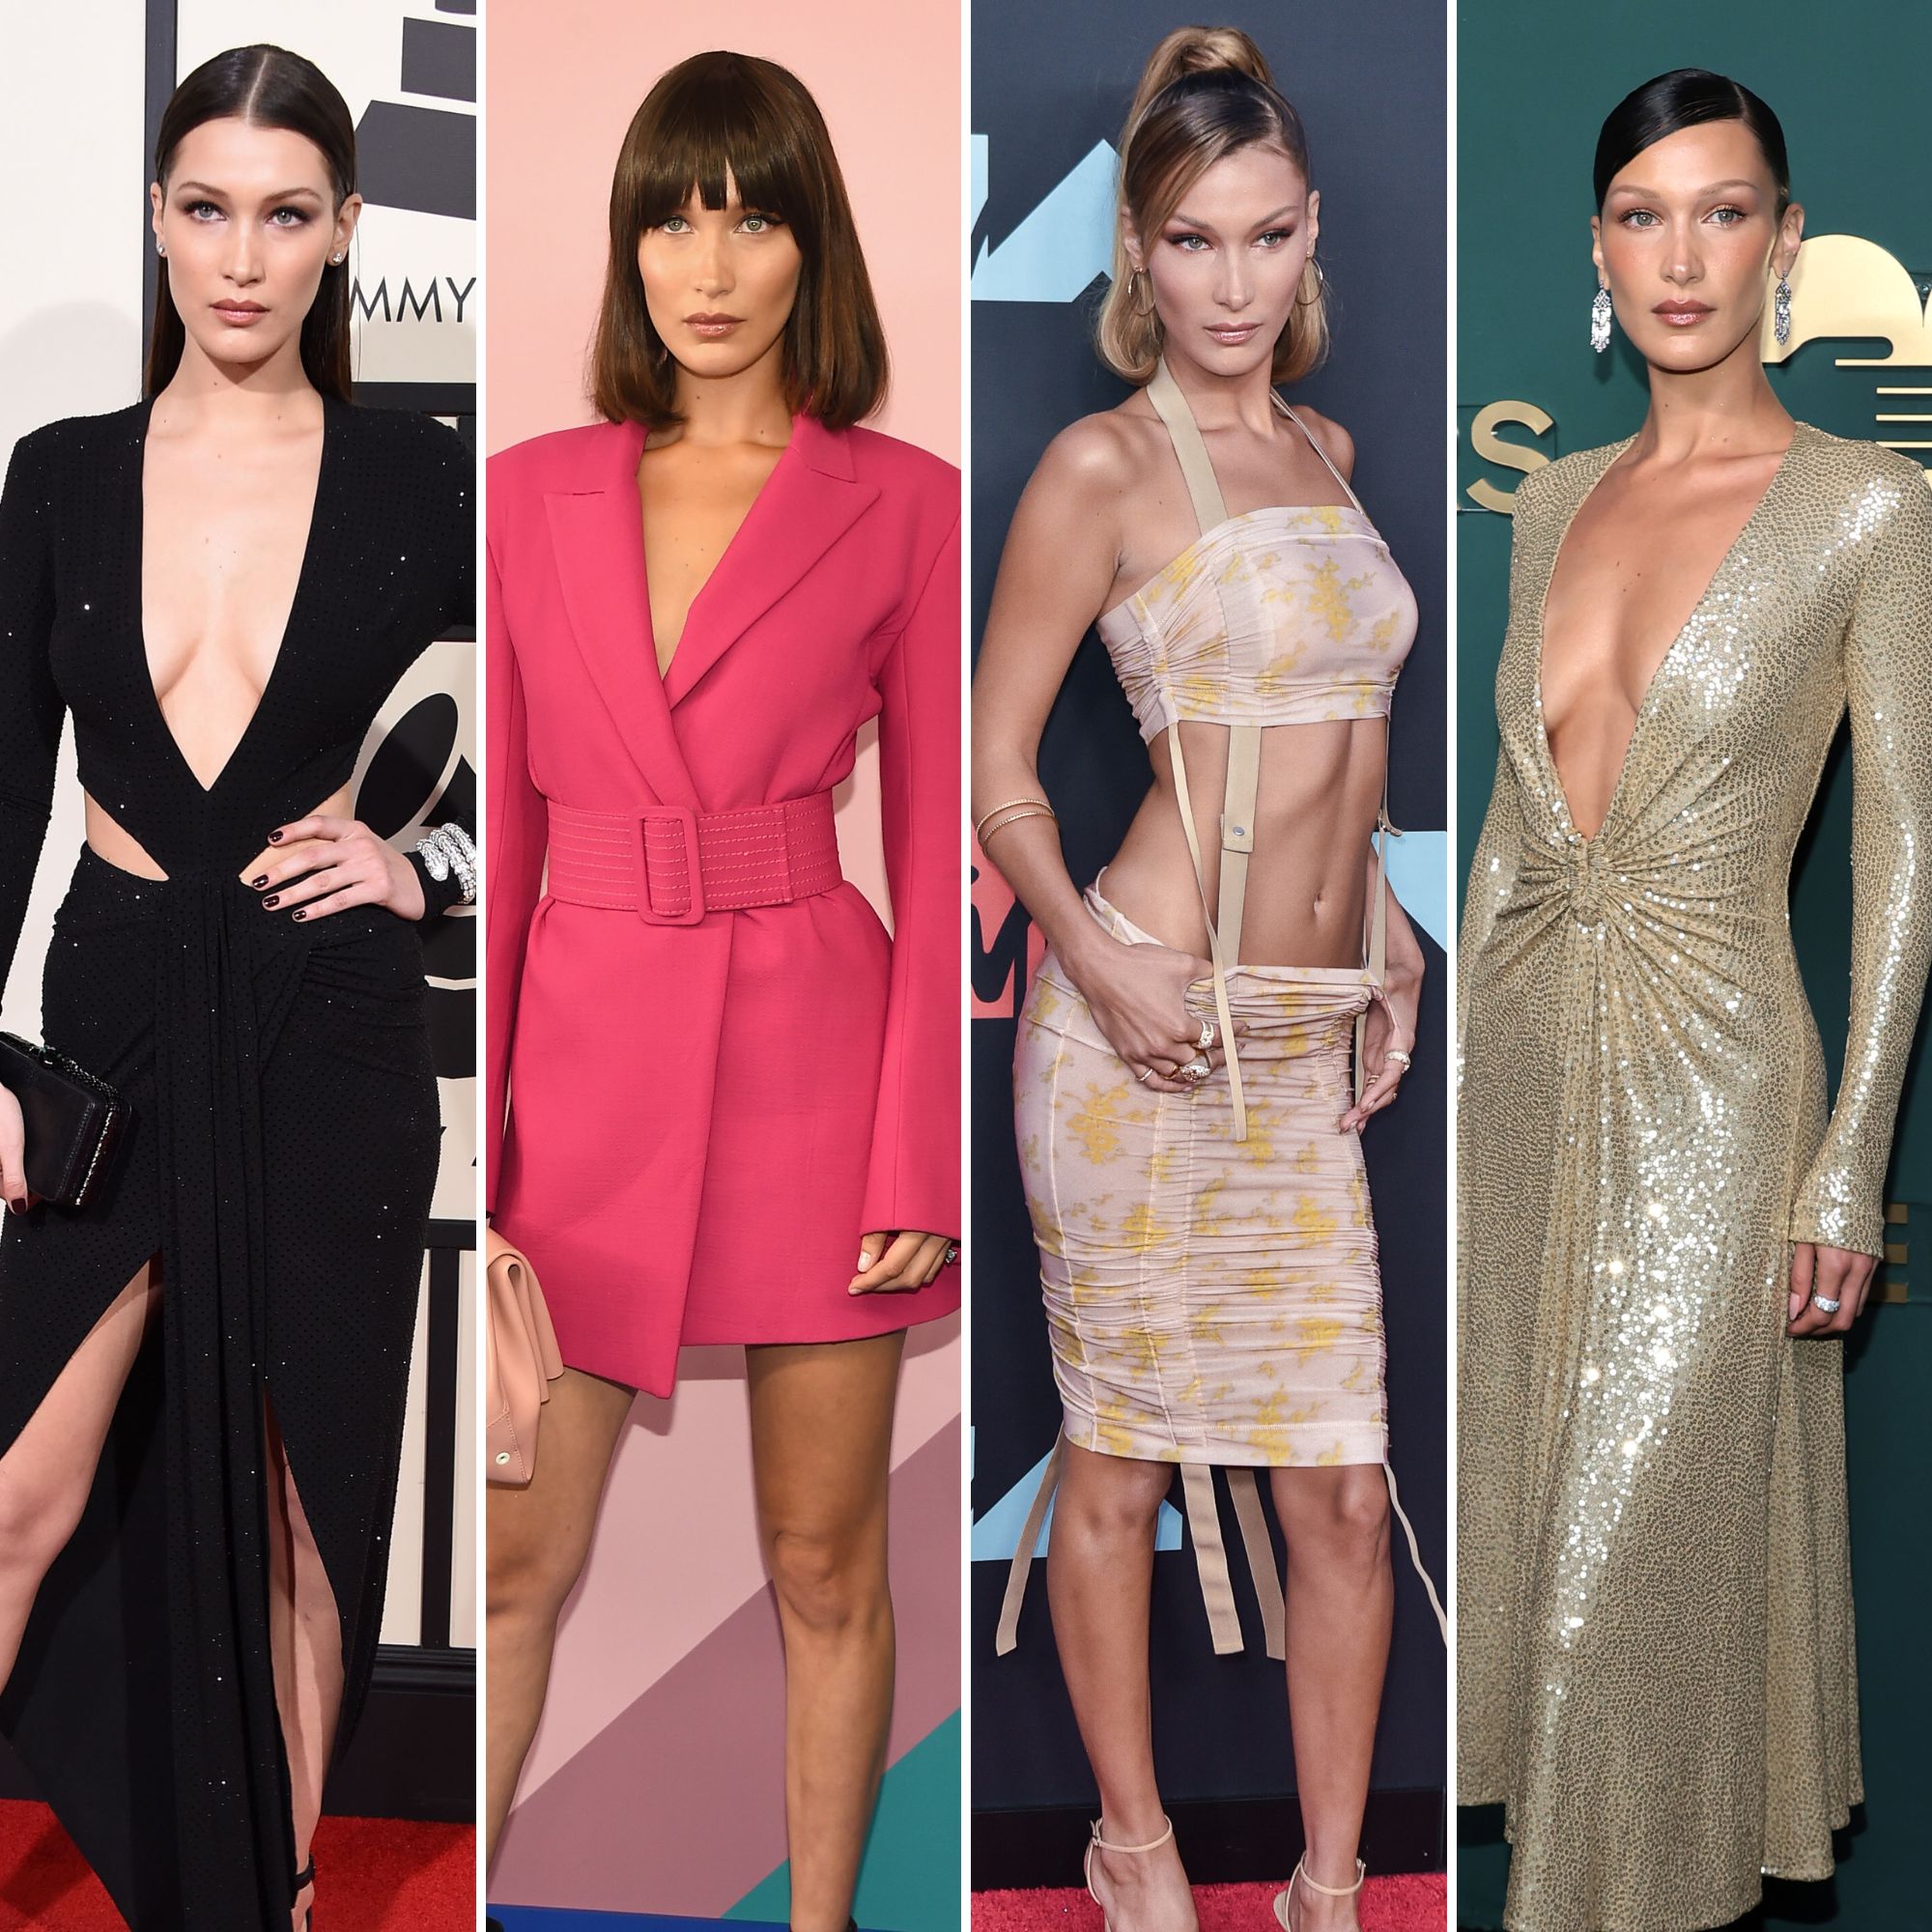 Bella Hadid's Style File: All Of The Model's Red Carpet Outfits